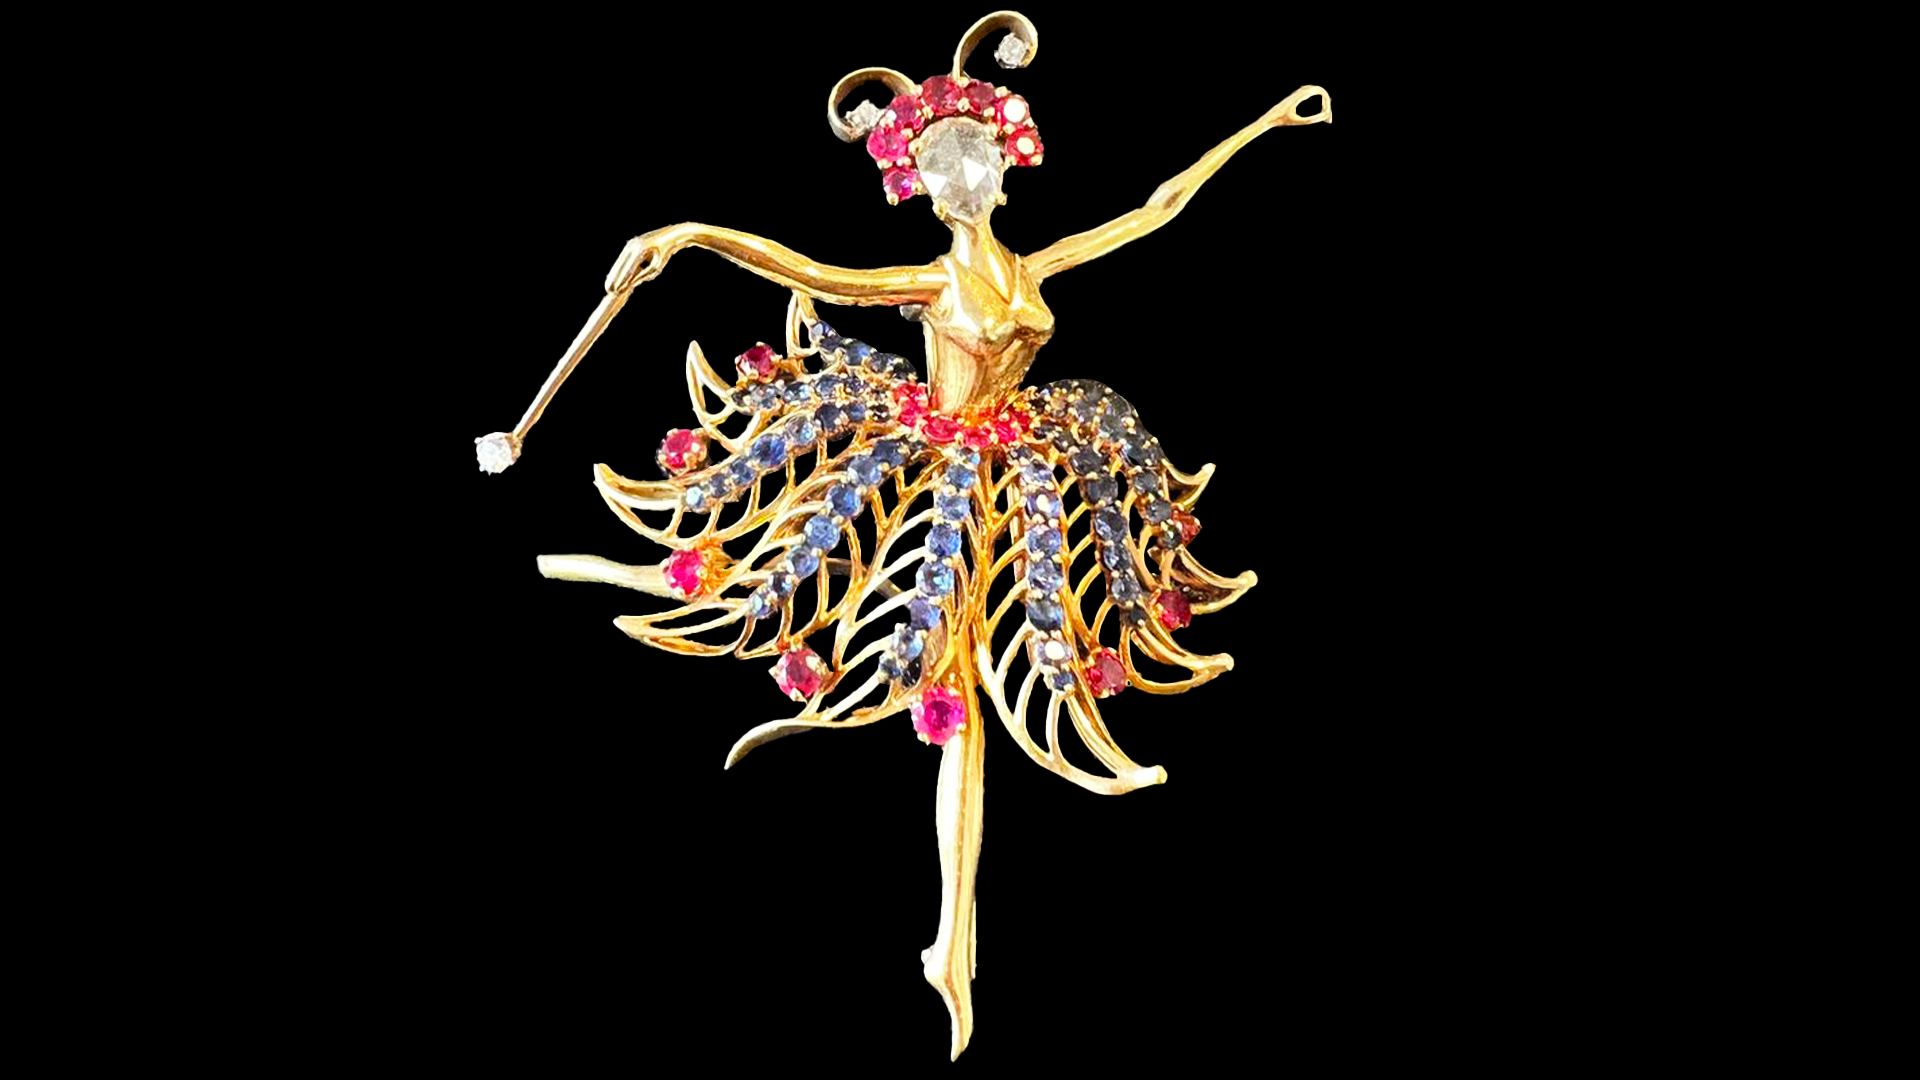 Ruby, sapphire, diamond and gold Ballerina brooch by John Rubel for Van Cleef & Arpels, courtesy private collection.